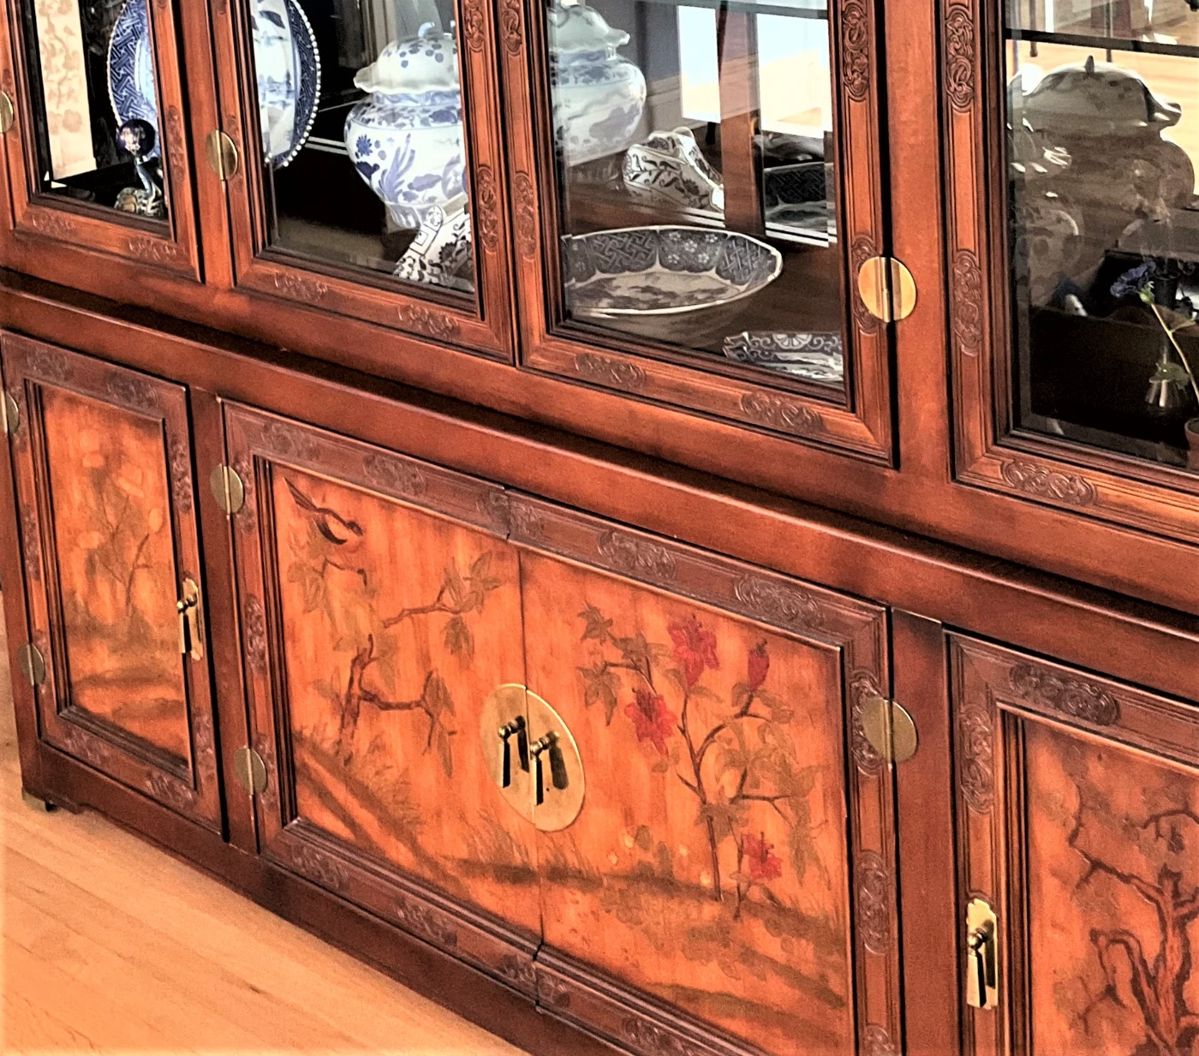 Hand-painted details on the bottom doors